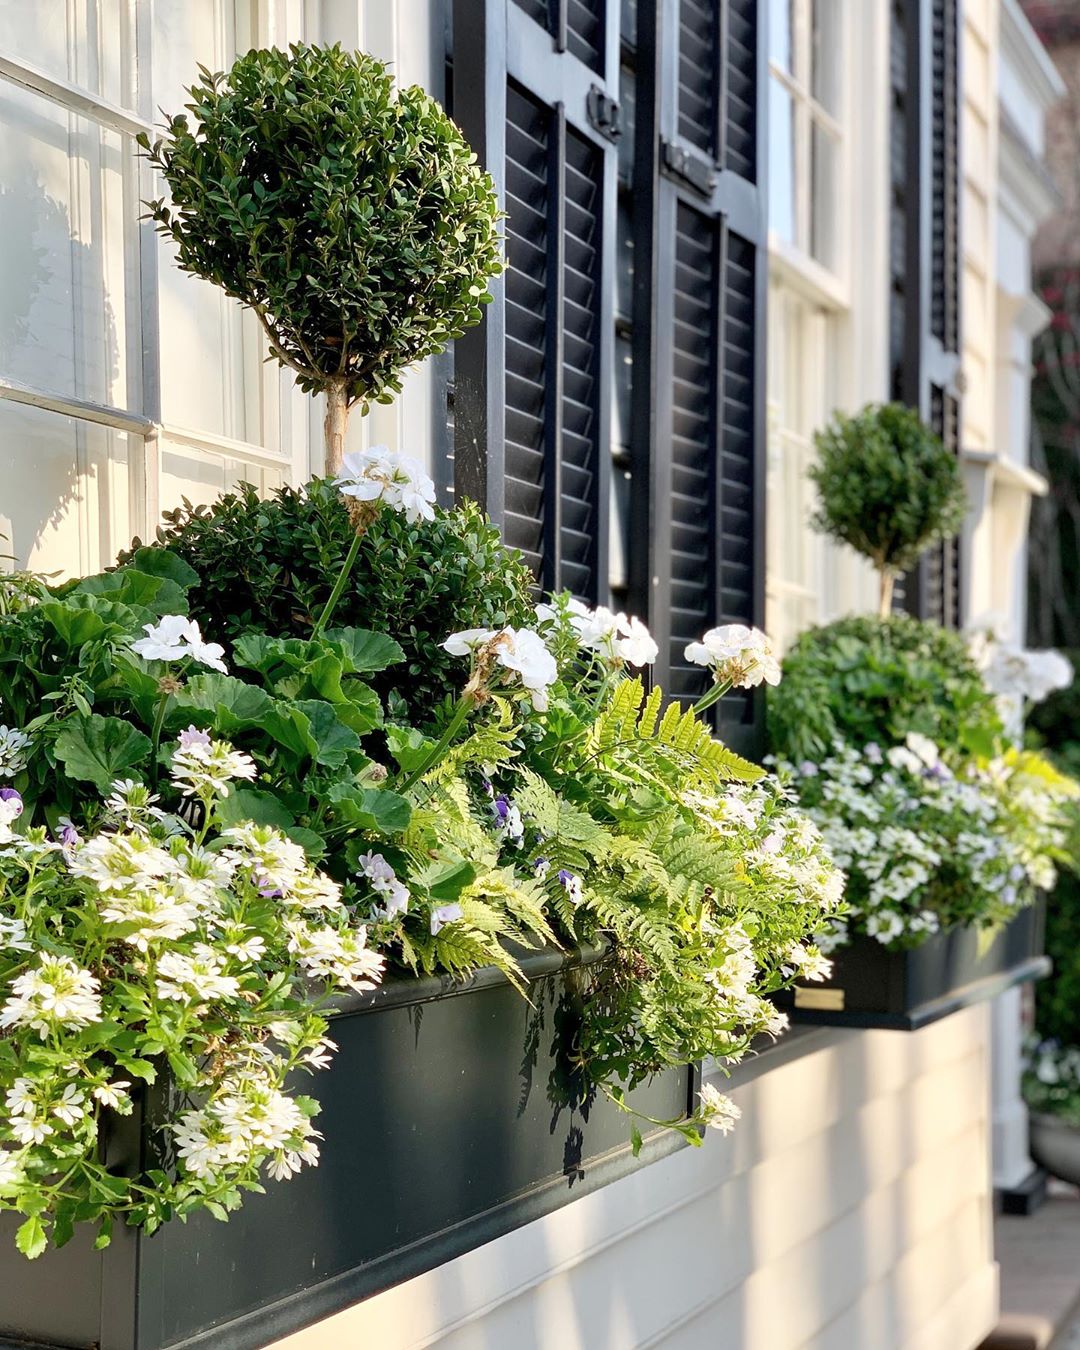 black window boxes filled out with lots of plants photo by Instagram user @ccbella.t